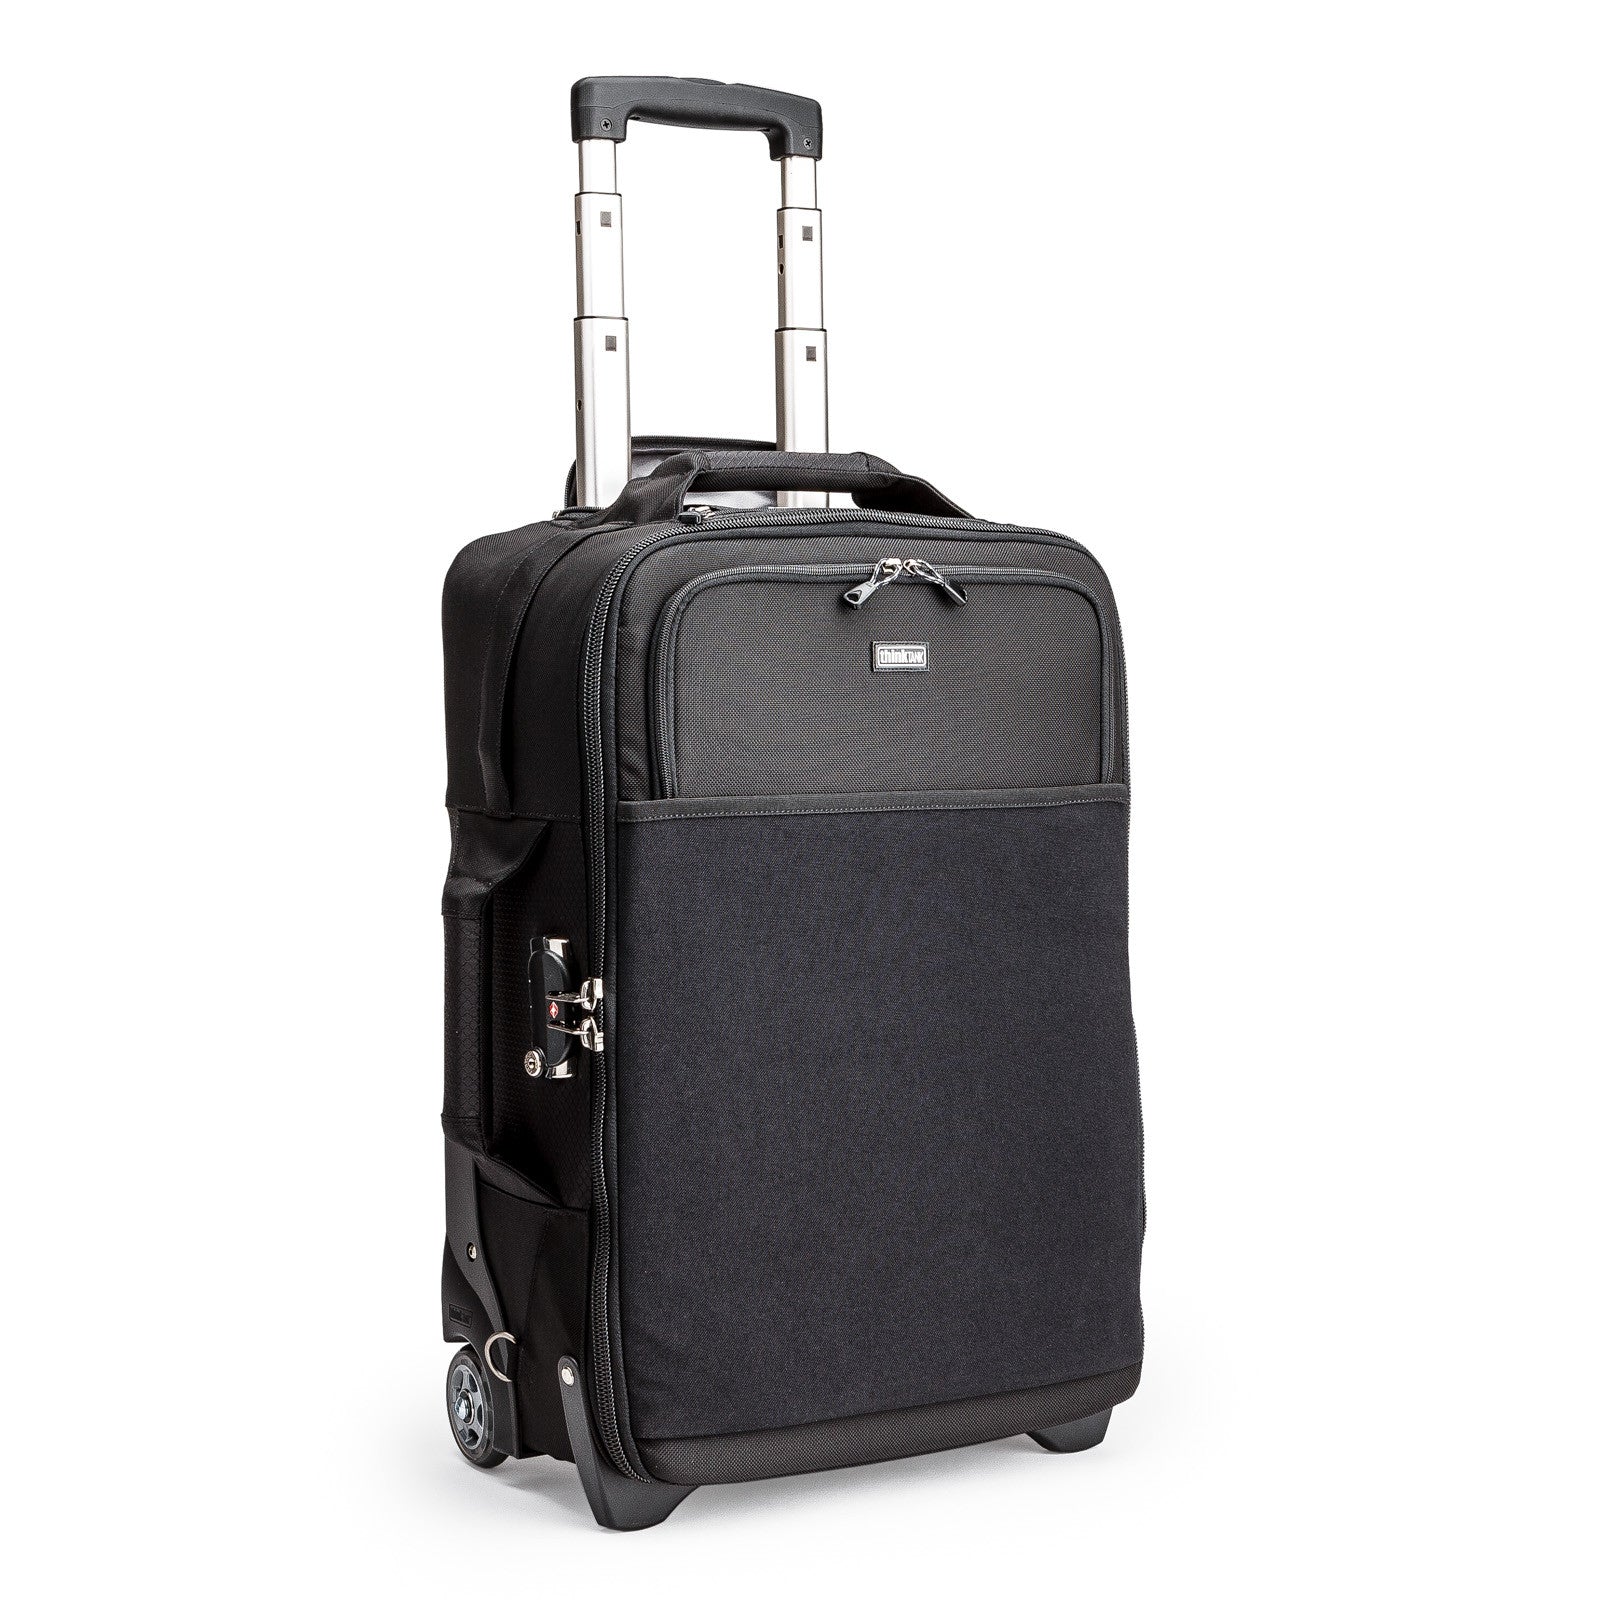 Airport Security™ Rolling Camera Bags for Airlines • Think Tank Photo